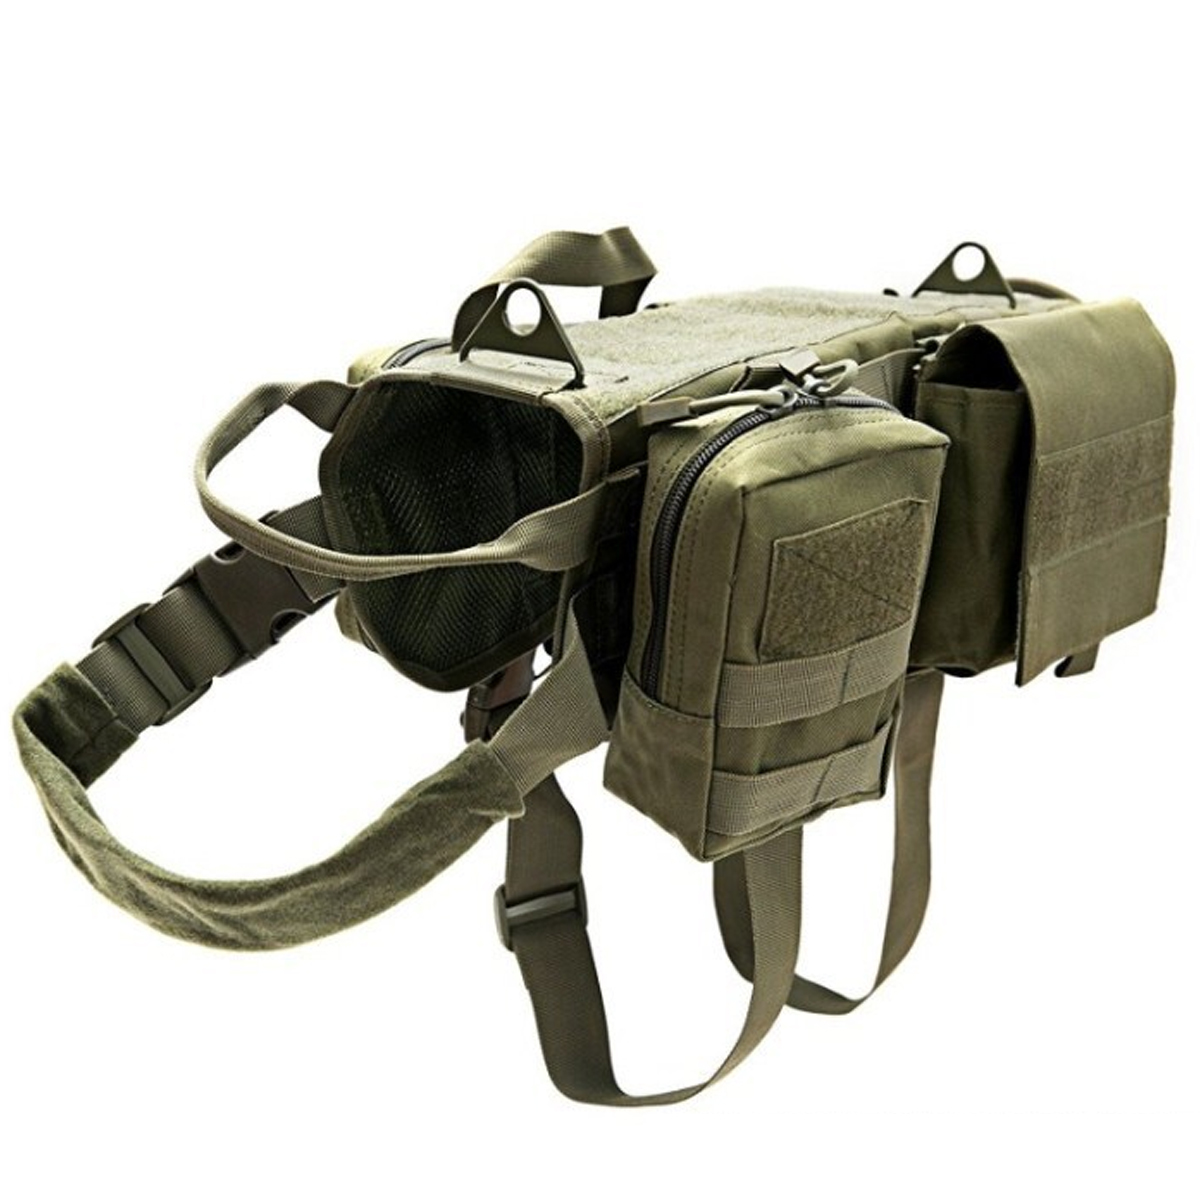 600D-Nylon-Tactical-Dog-Vests-Military-Dog-Clothes-with-Storage-Bag-Training-Load-Bearing-Harness-1817367-5